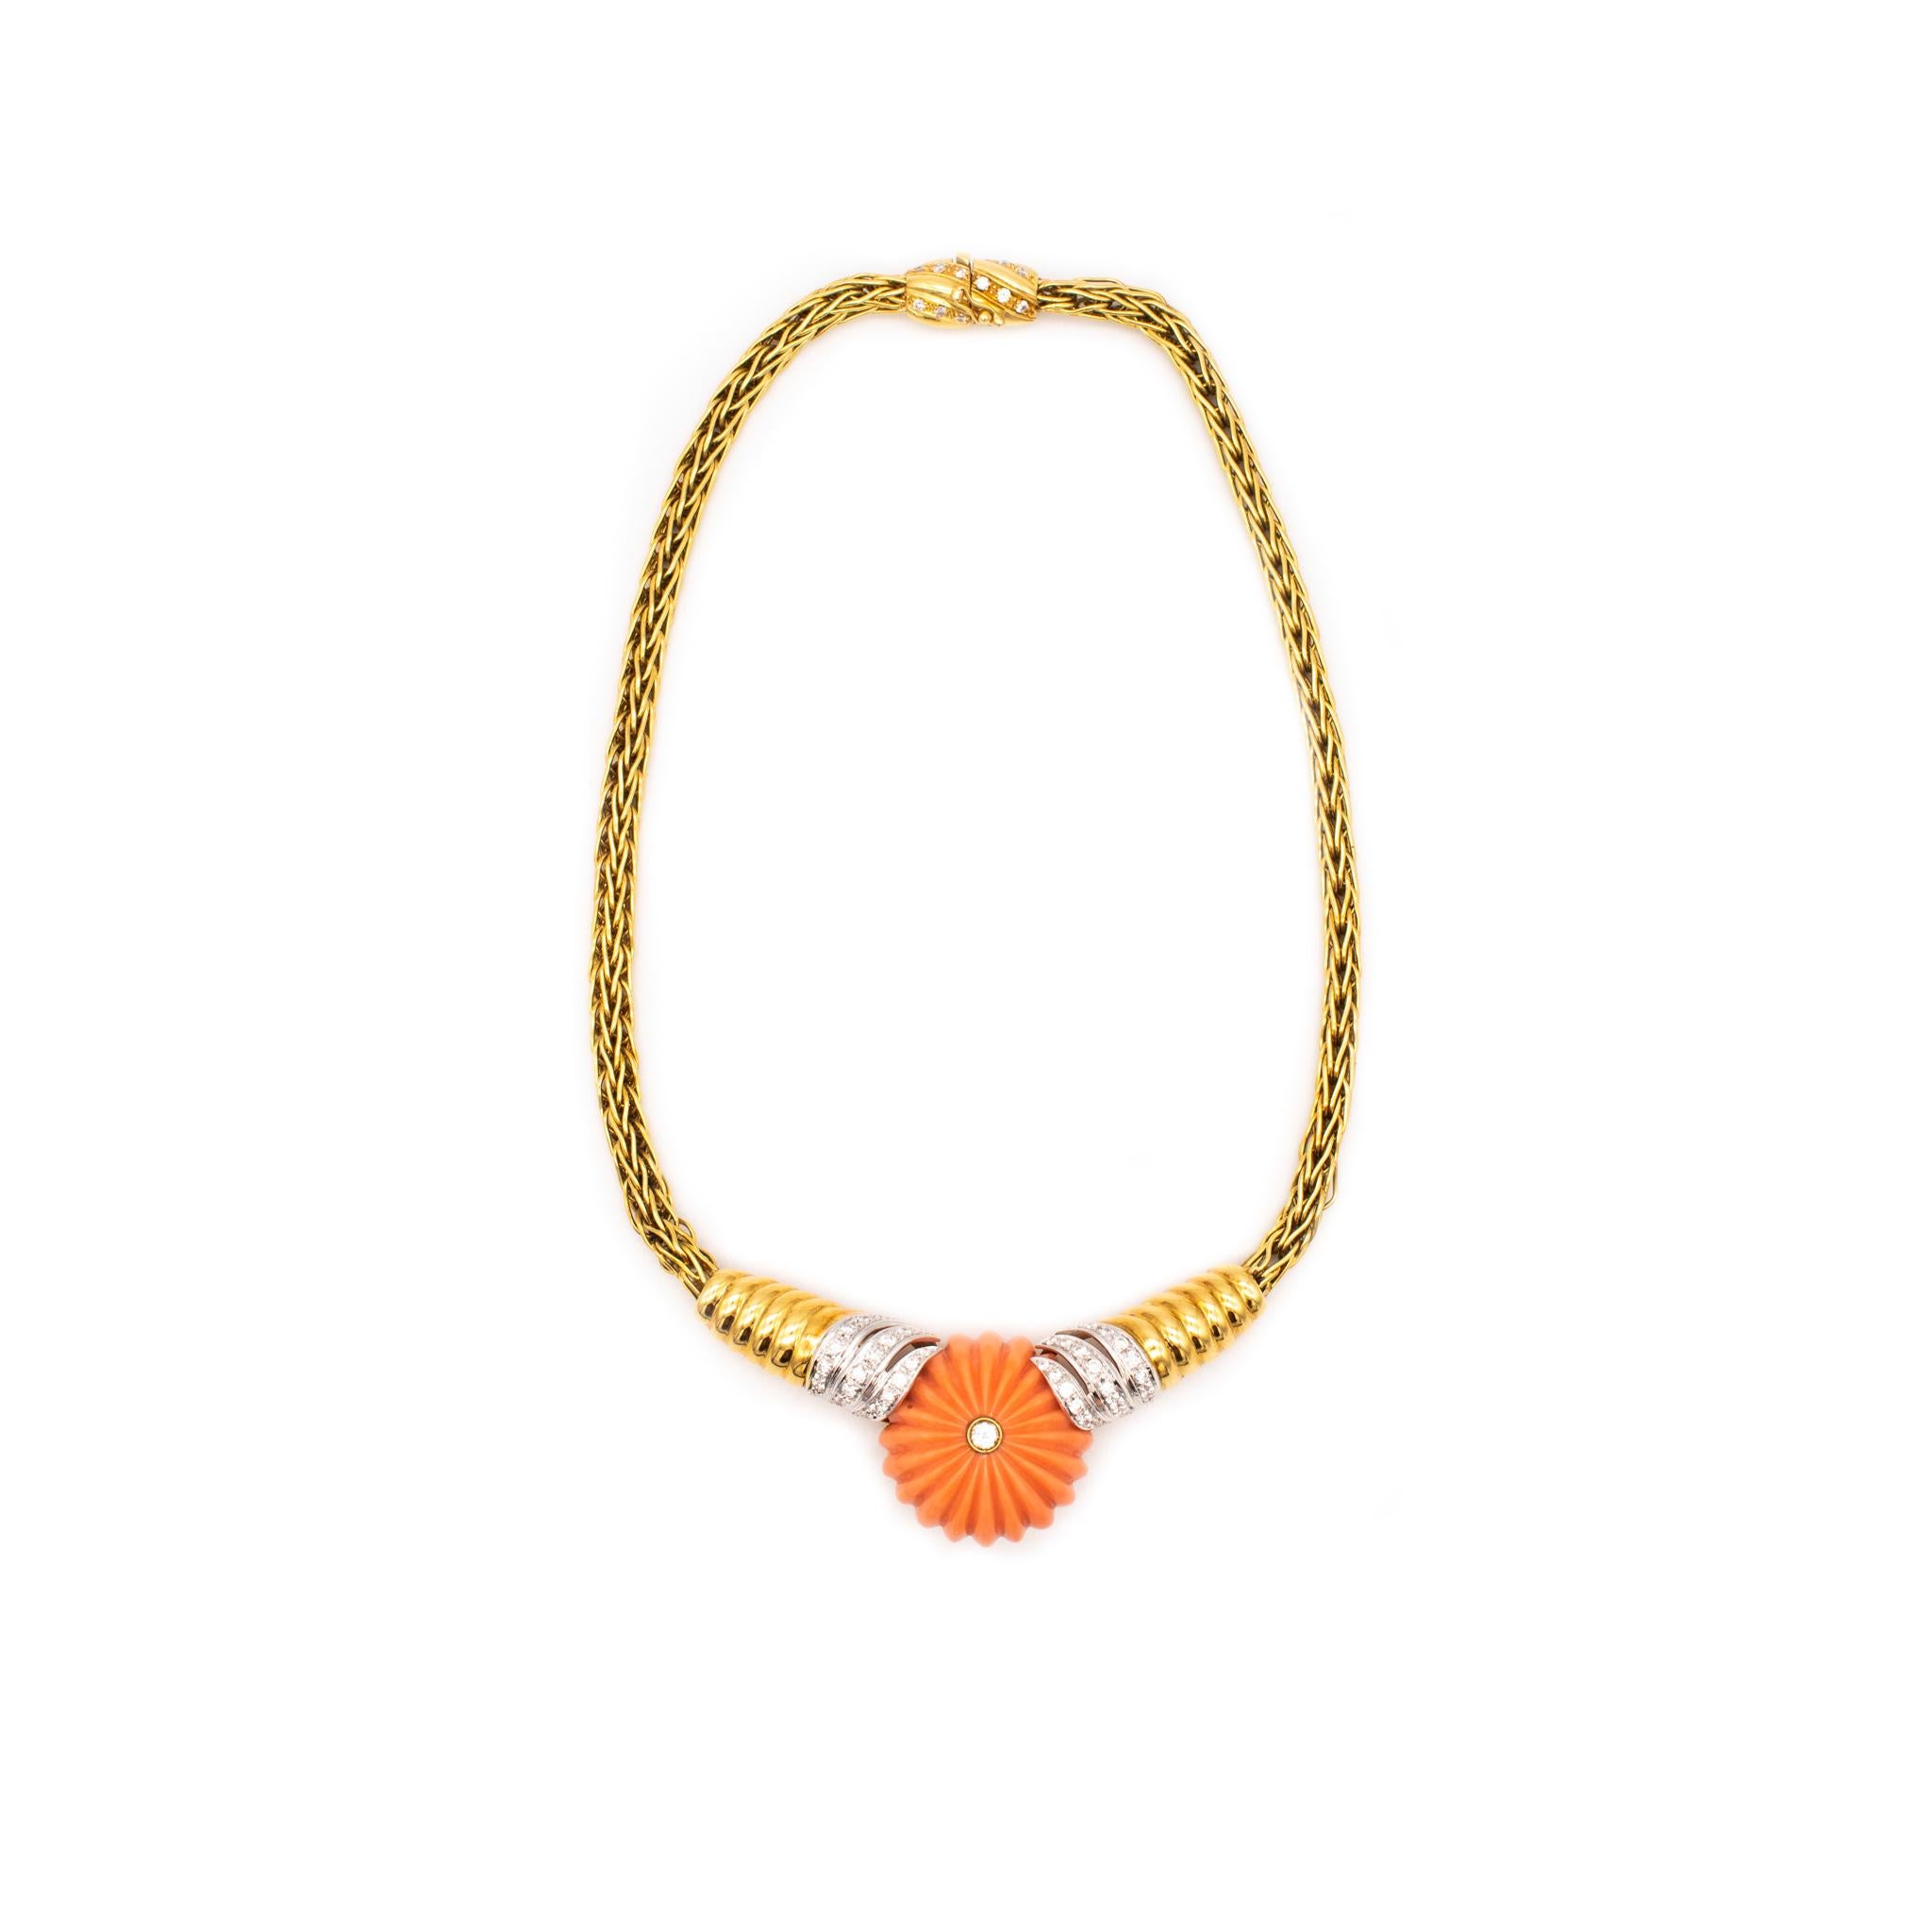 Exceptional necklace designed by Spritzer & Fuhrmann.

Very handsome and elegant piece from the mid-century period, circa 1960's. Surely, this is a one-of-a-kind necklace, crafted in solid 18 karats yellow gold with accents in white gold for the